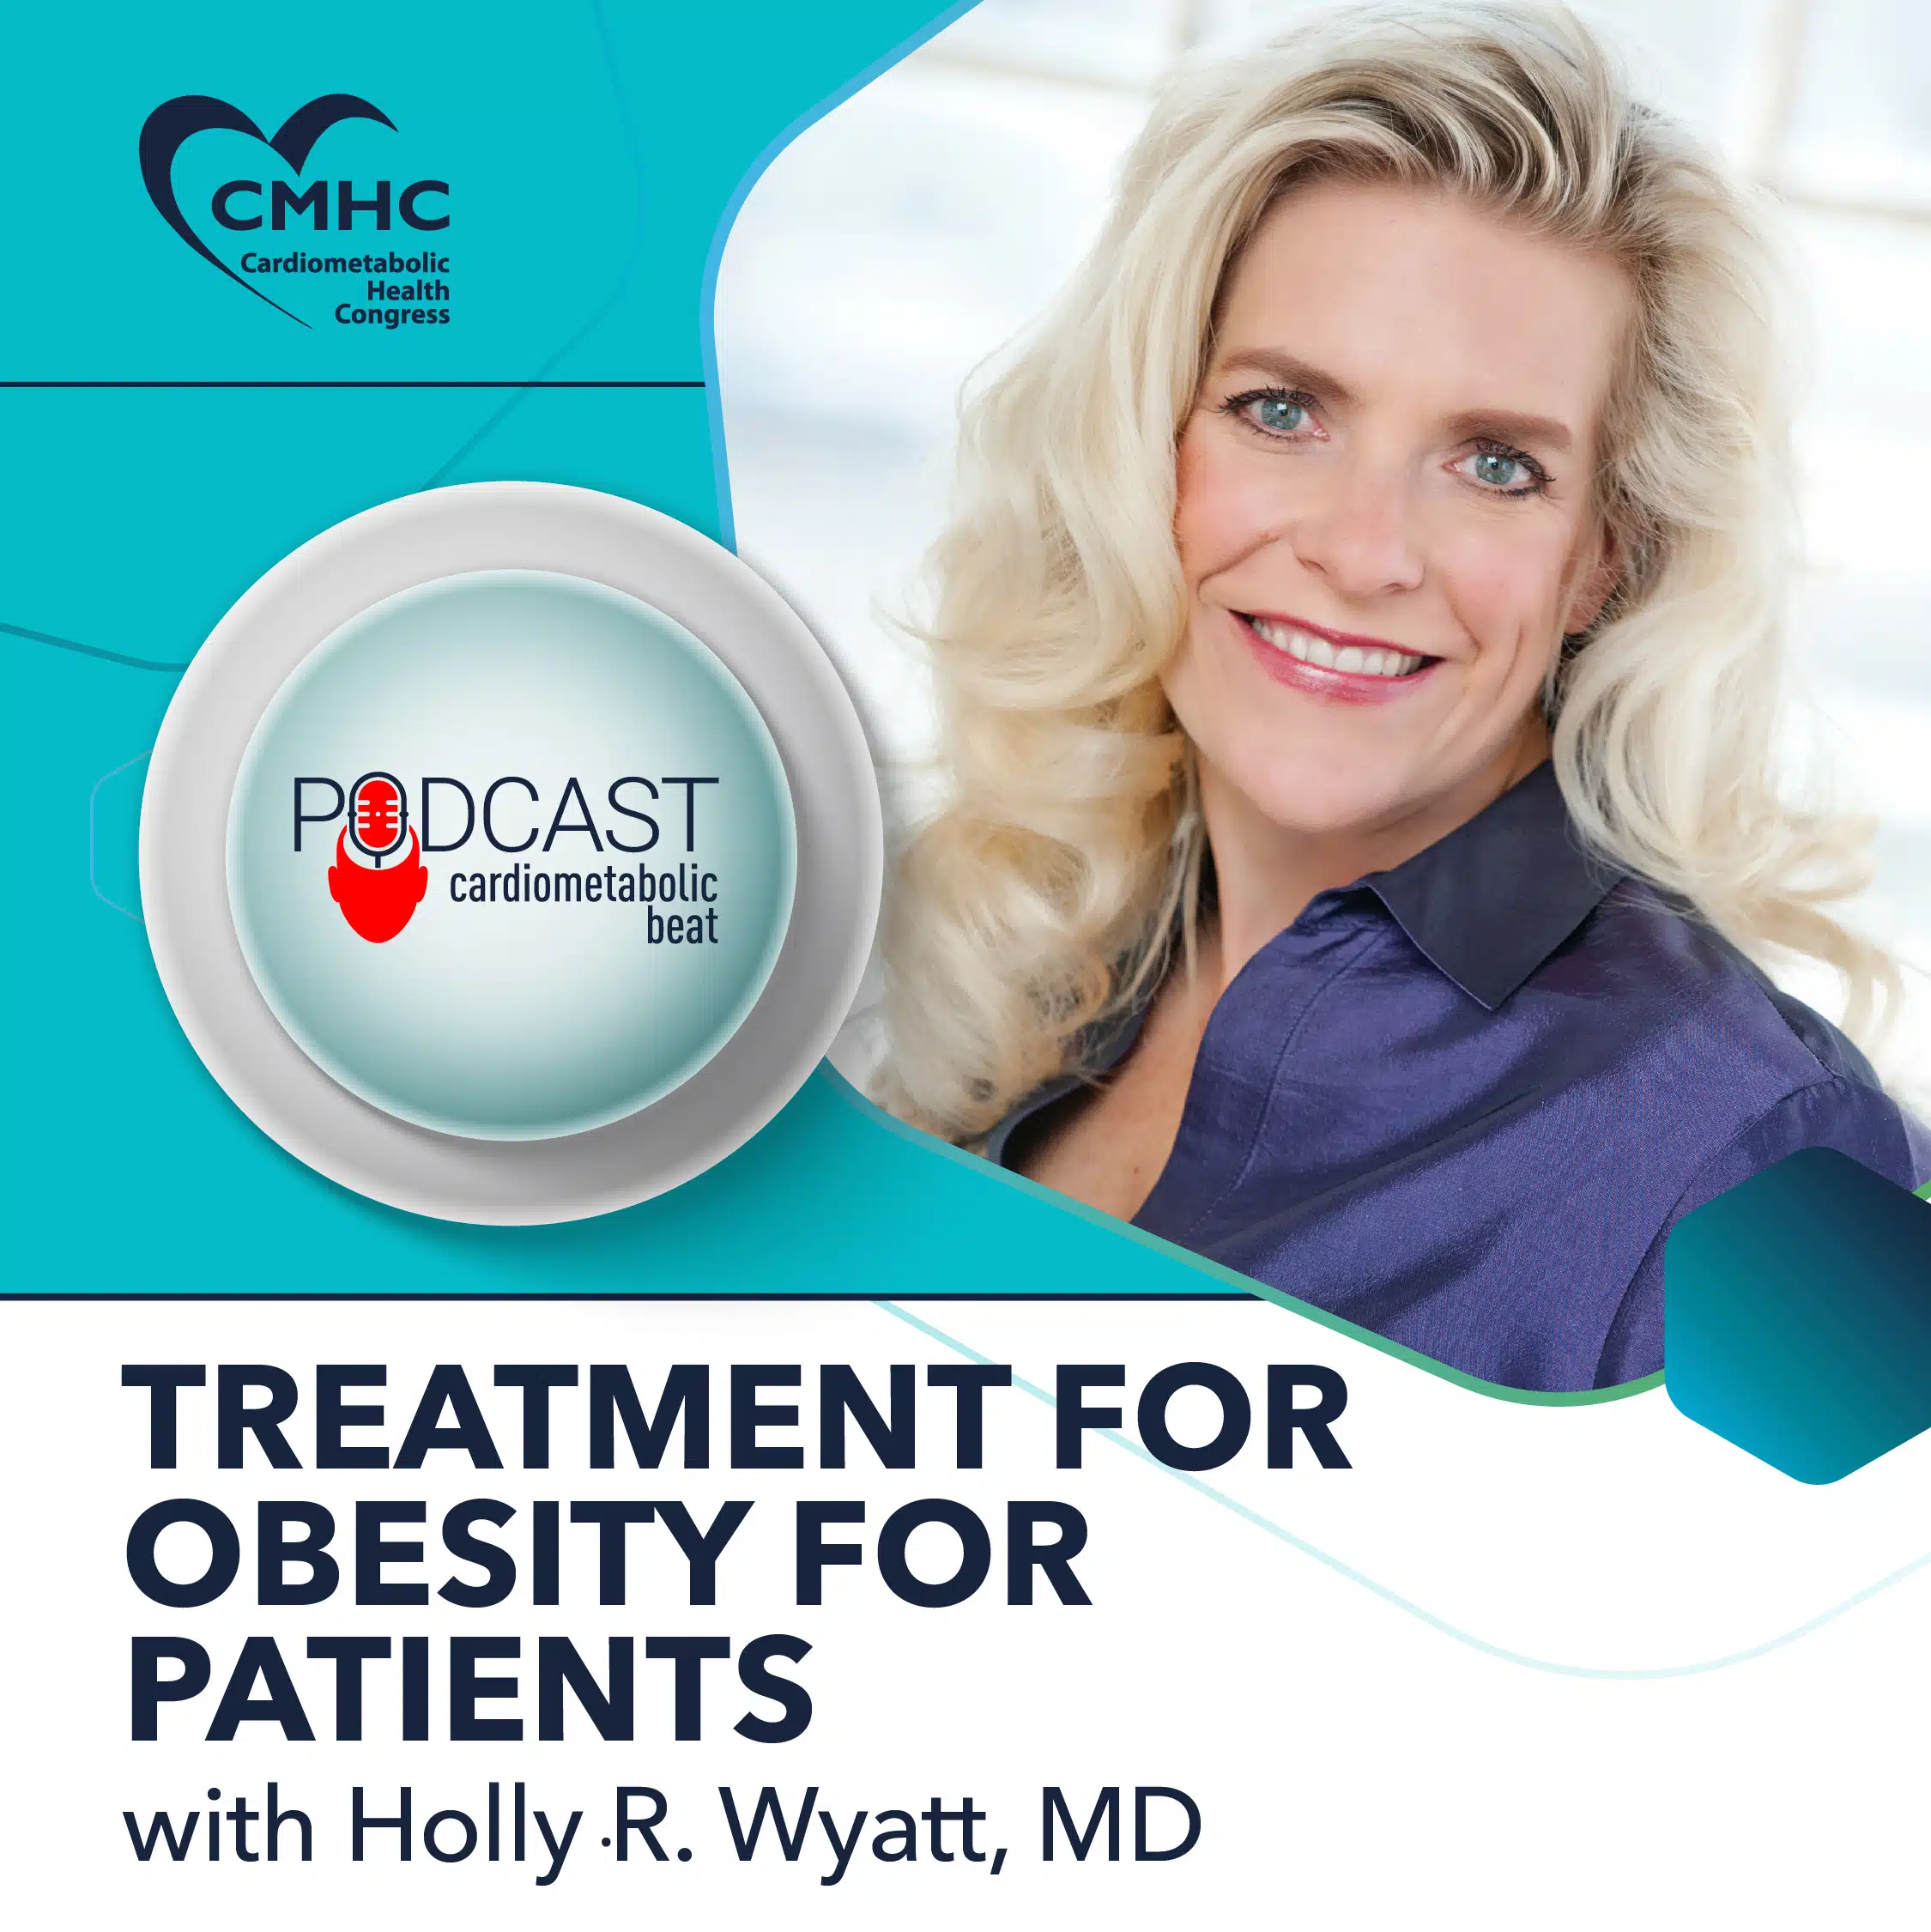 Podcasts Slide Treatment For Obesity Holly R. Wyatt, MD 02